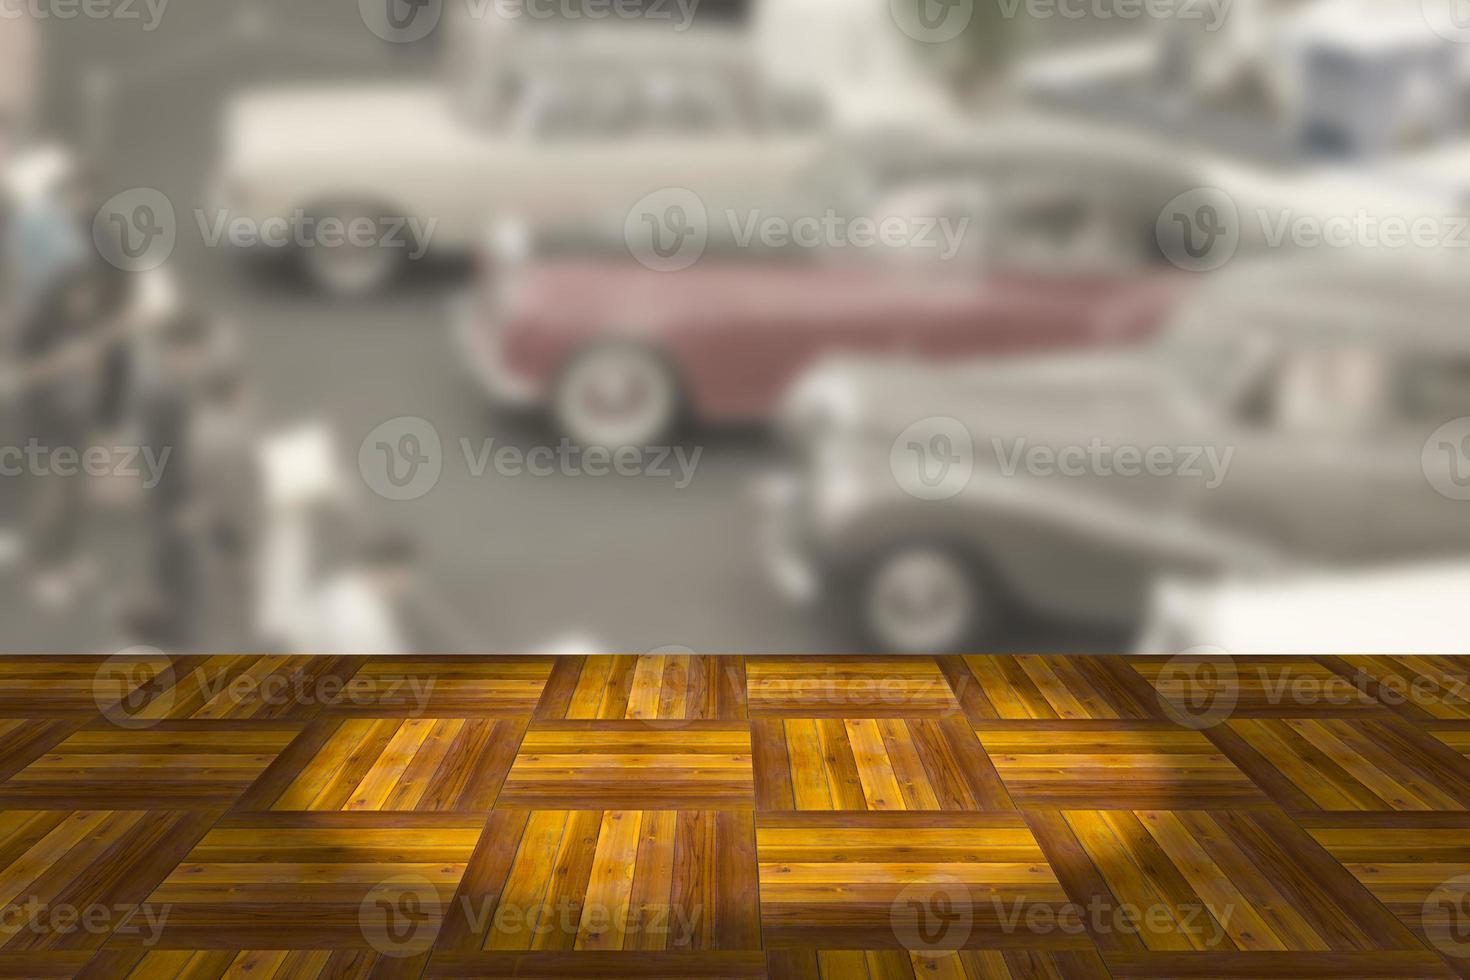 Empty wooden board space platform with vintage car show room blurry background photo